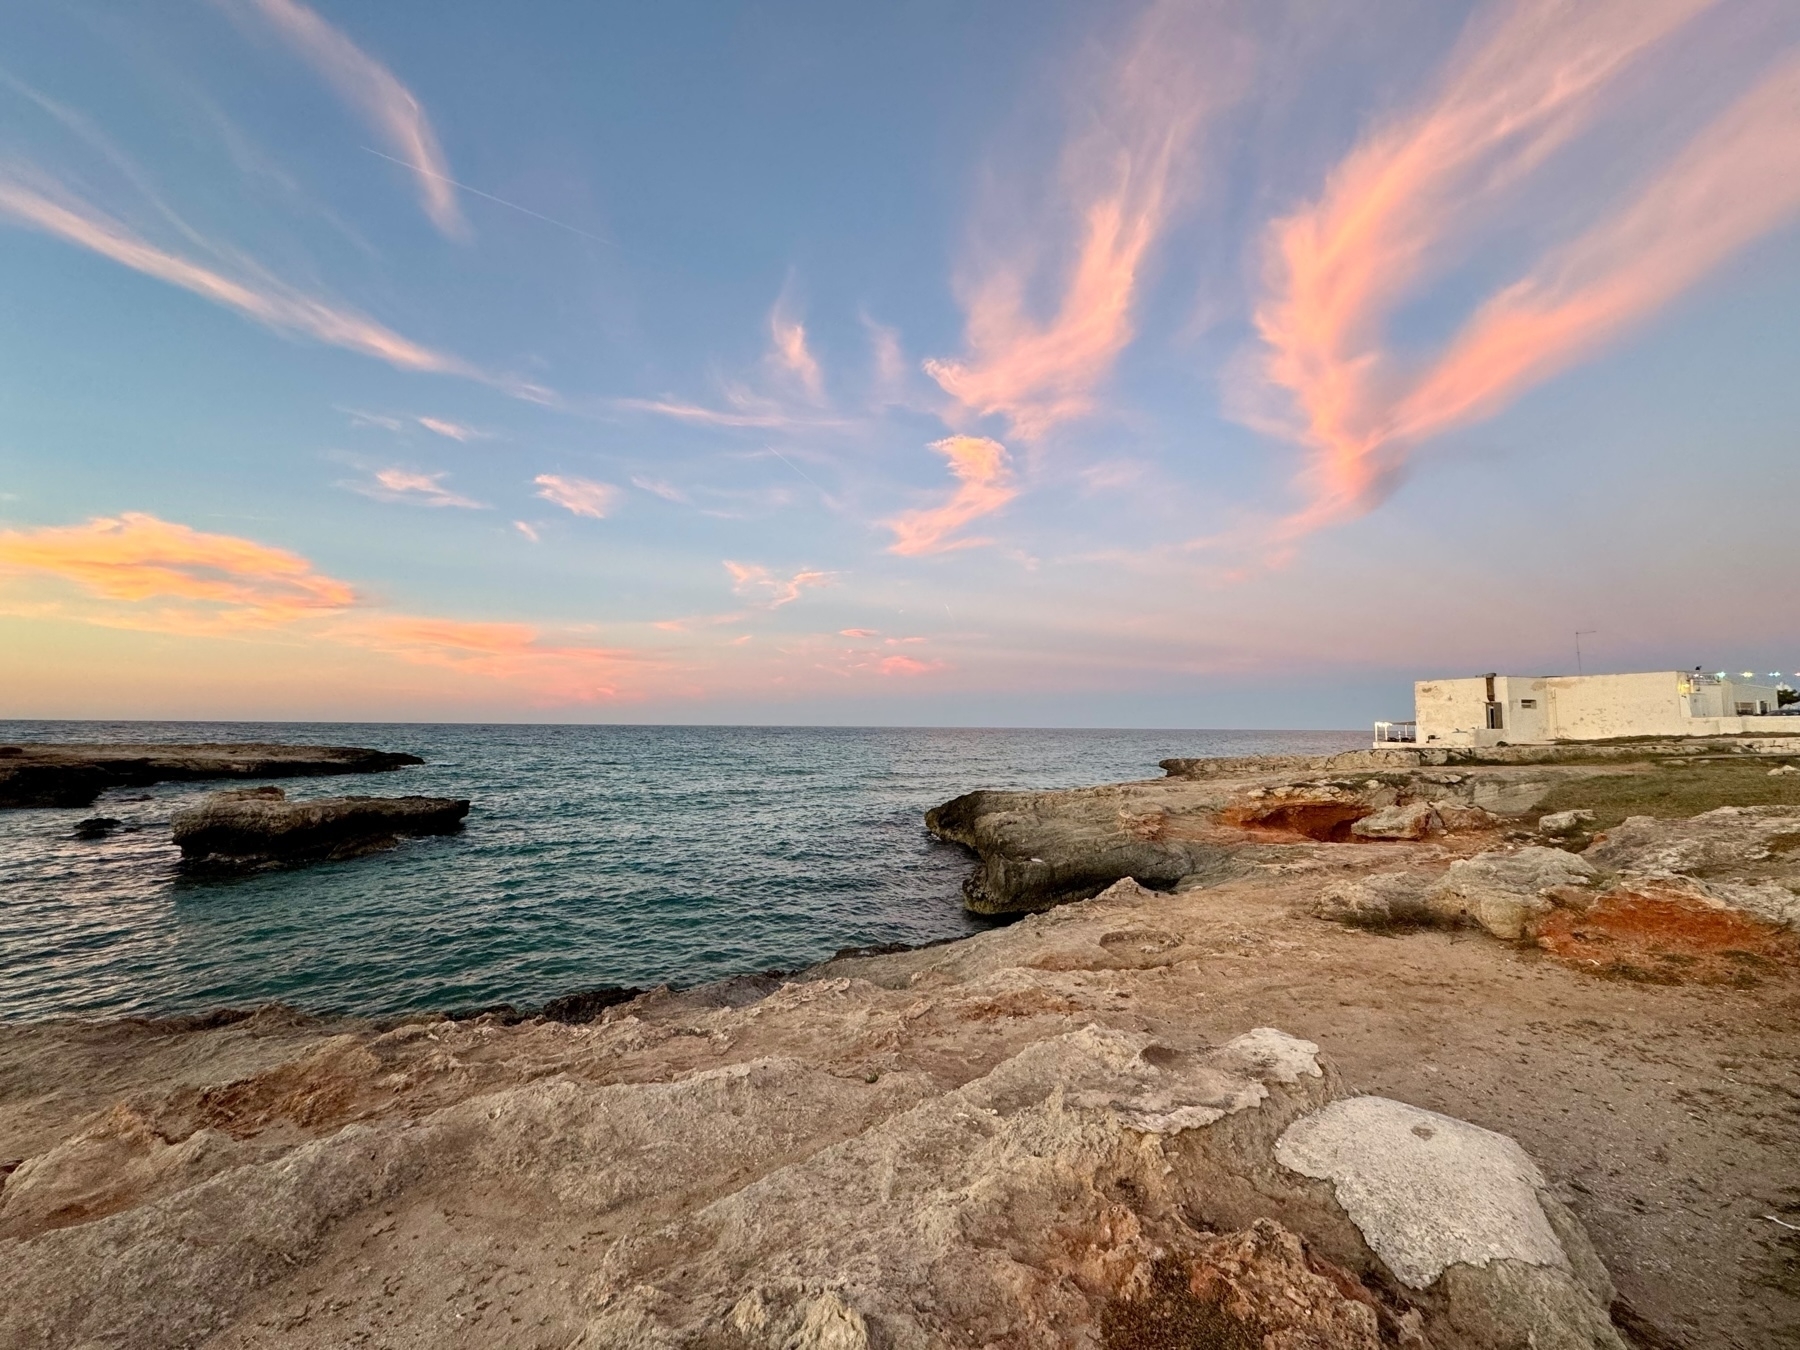 A rocky coastline at sunset with a calm sea. The sky features pastel pink and orange clouds scattered across a blue backdrop. A white building is situated near the edge of the rocky shore on the right side of the image.